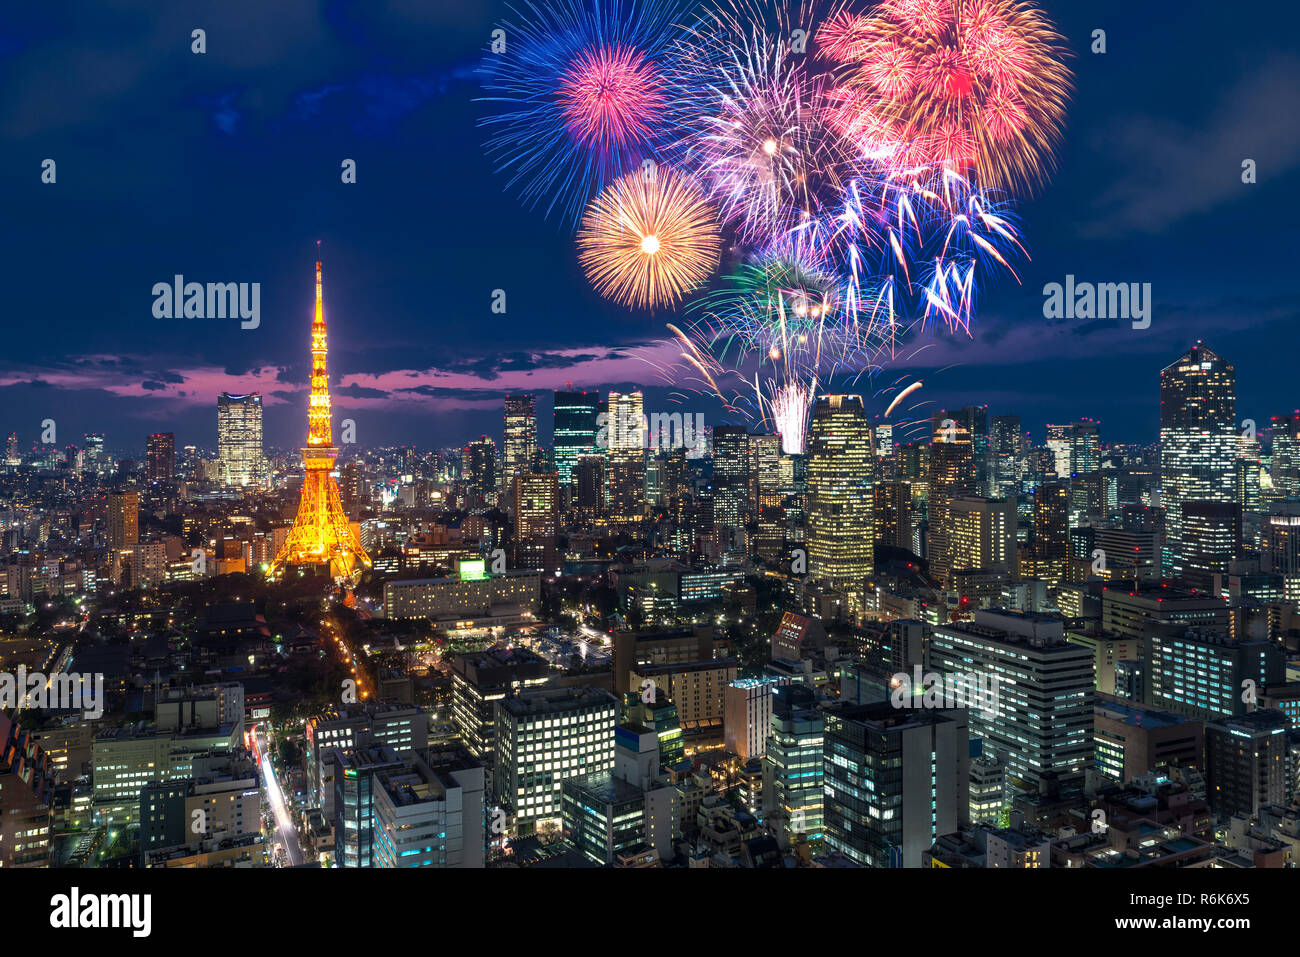 Tokyo at night, Fireworks new year celebrating over tokyo cityscape at night in Japan Stock Photo